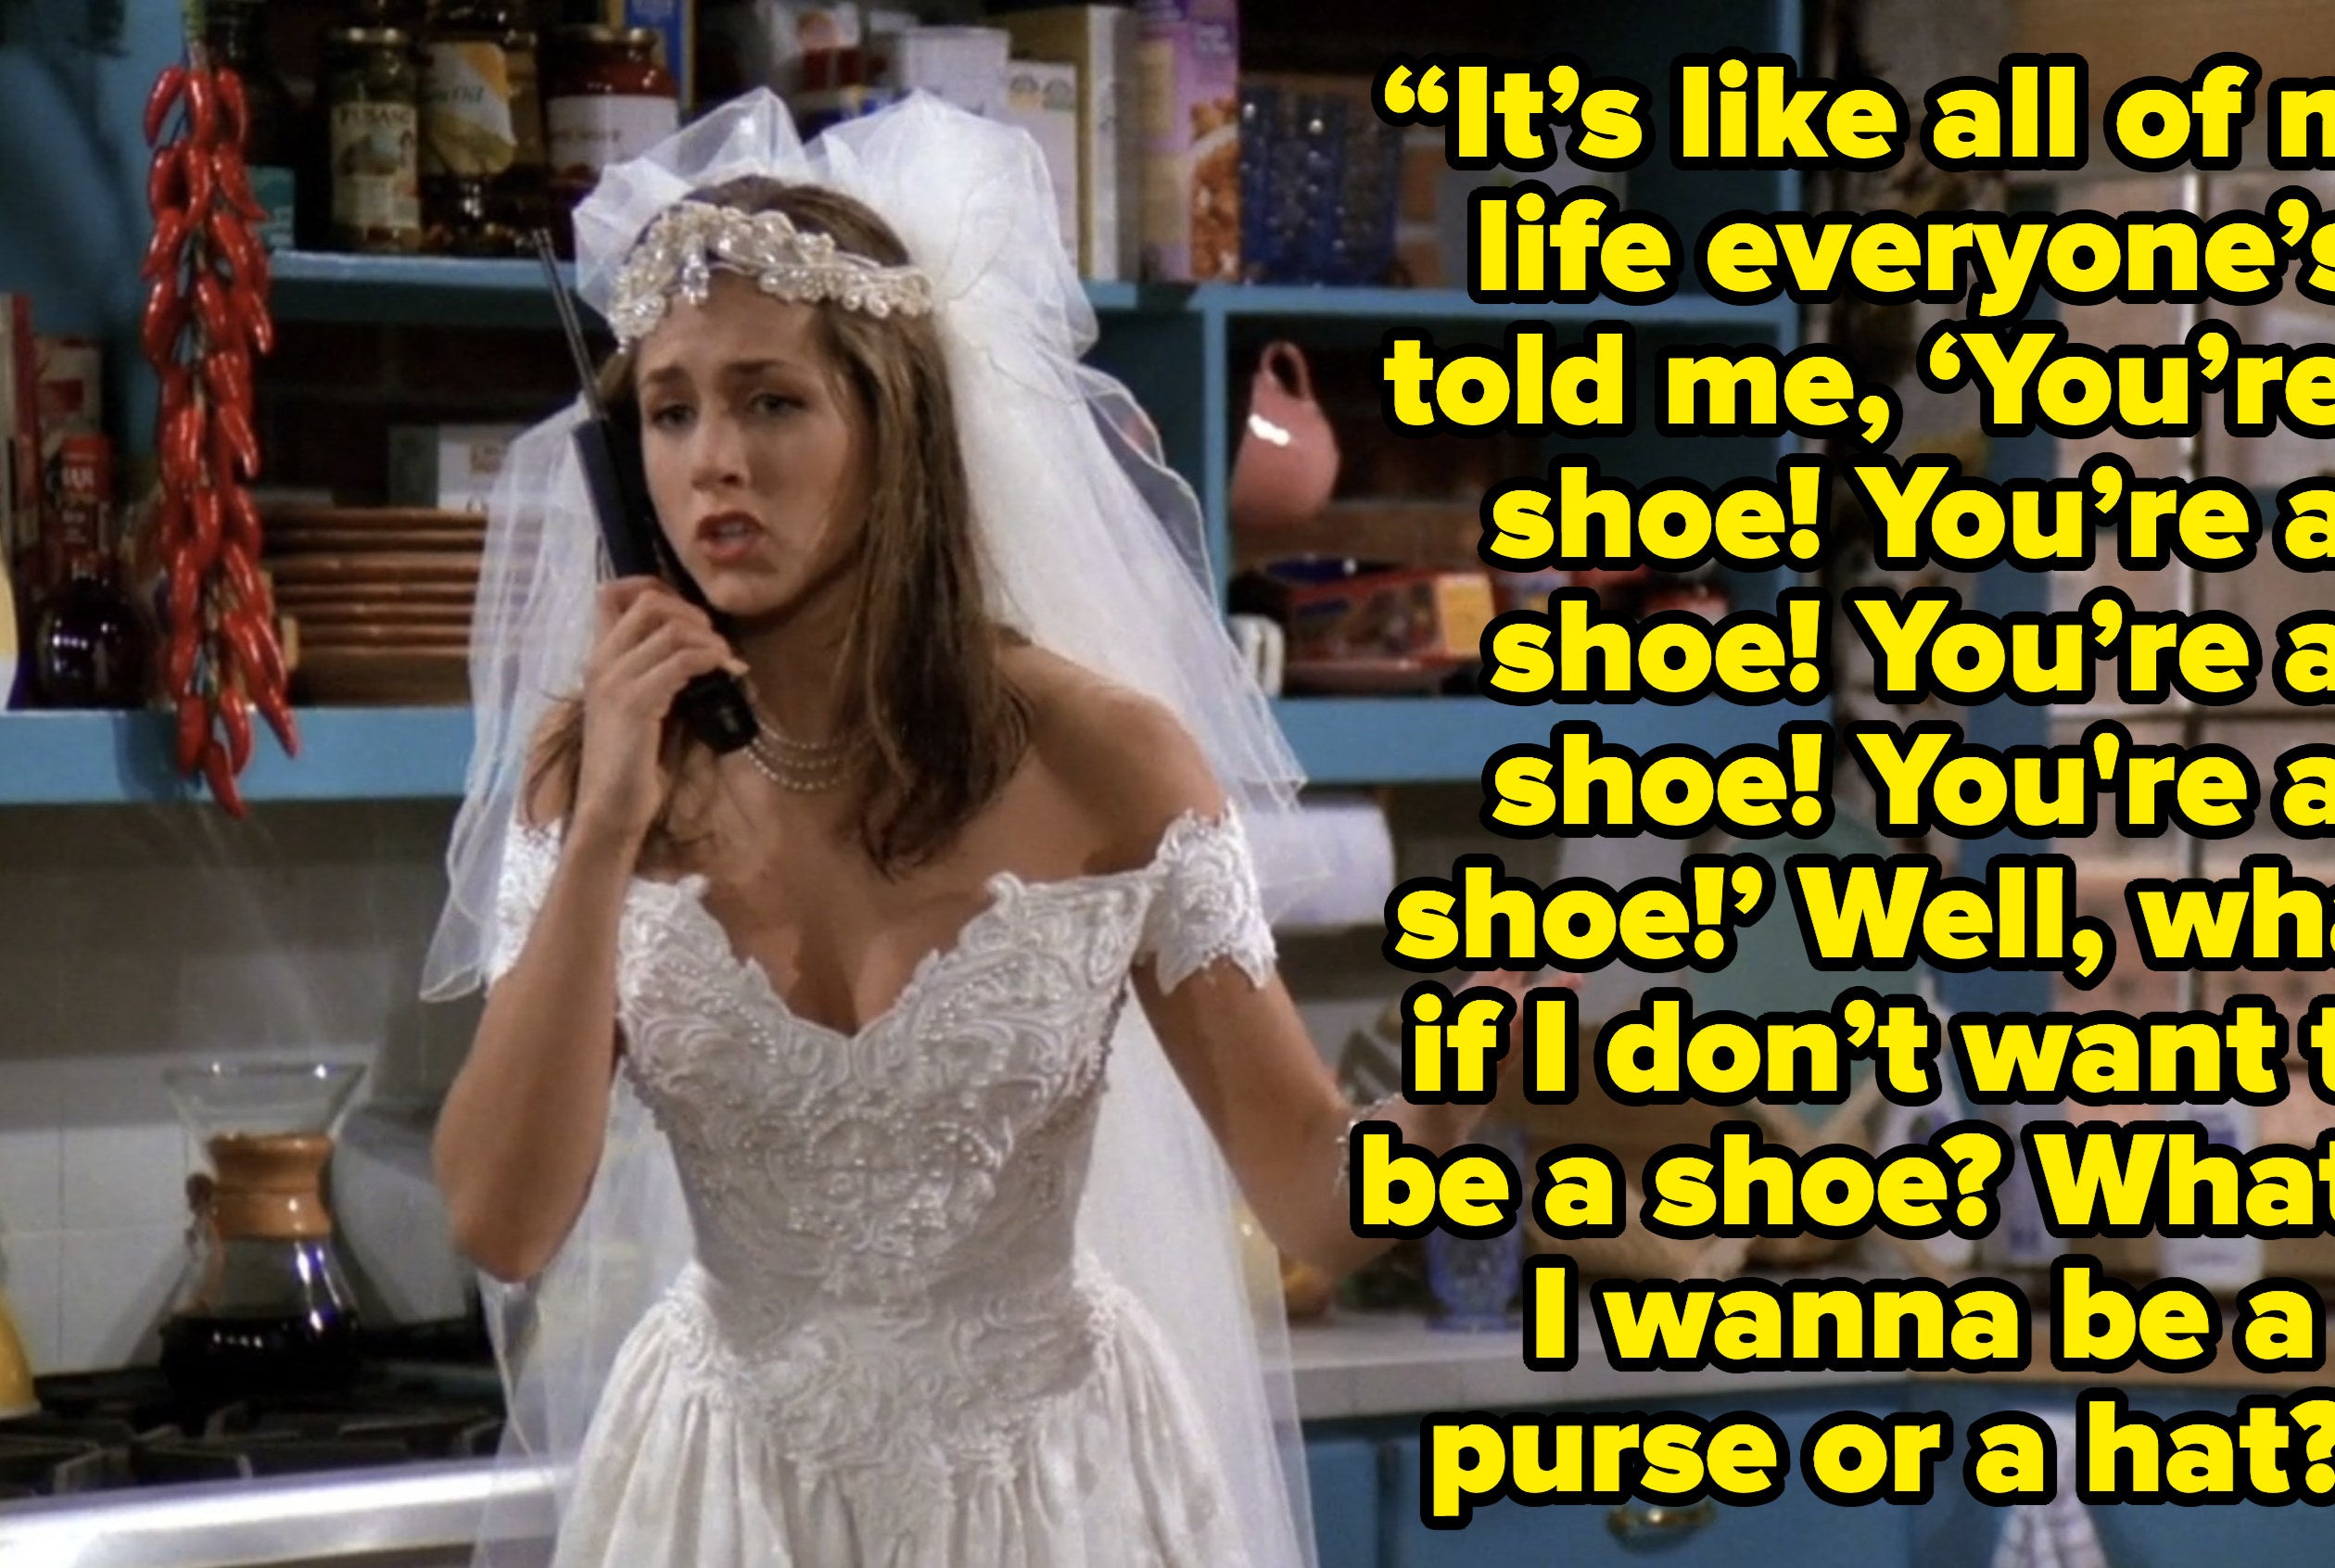 rachel saying “It’s like all my life everyone’s told me, ‘You’re a shoe! You’re a shoe! You’re a shoe!’ Well, what if I don’t want to be a shoe? What if I wanna be a purse or a hat?” on friends